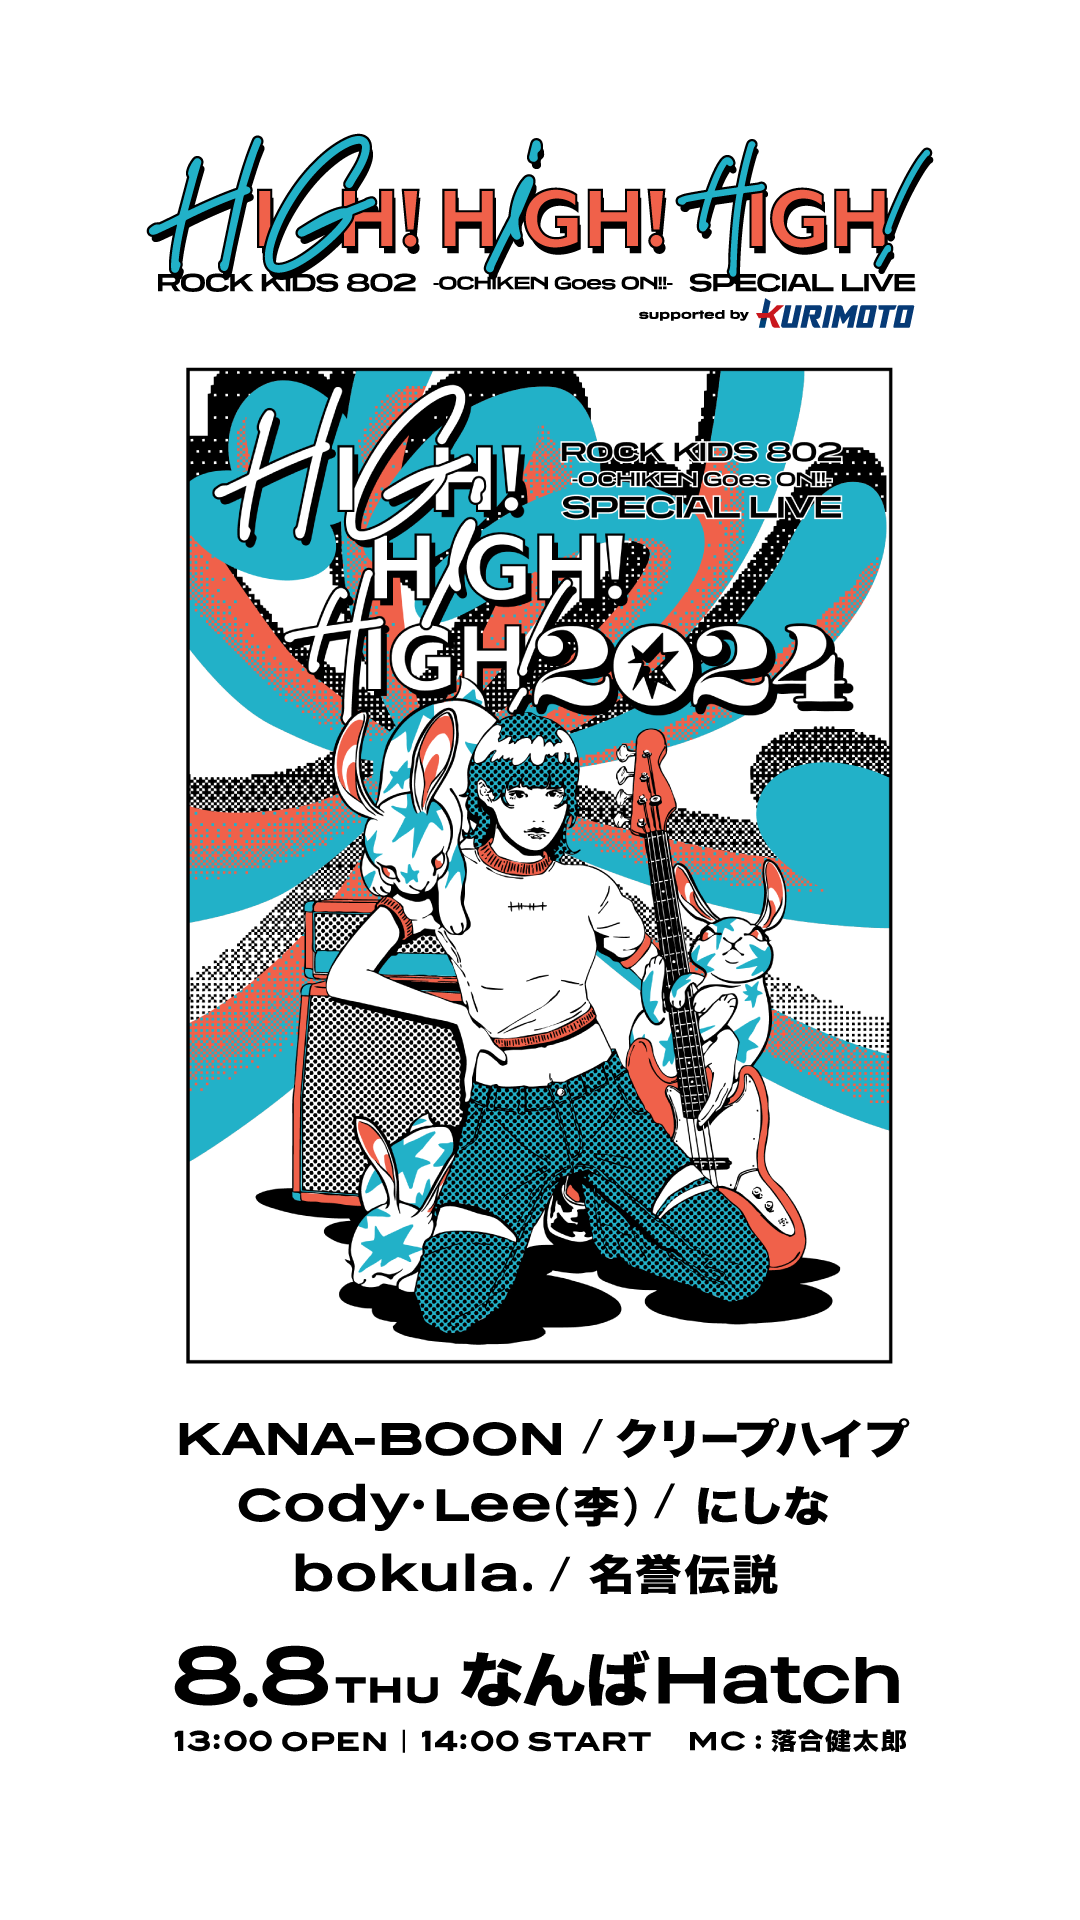 FM802 35th ANNIVERSARY“Be FUNKY!!”ROCK KIDS 802－OCHIKEN Goes ON!!-SPECIAL  LIVEHIGH!HIGH!HIGH! Supported by 栗本鐵工所